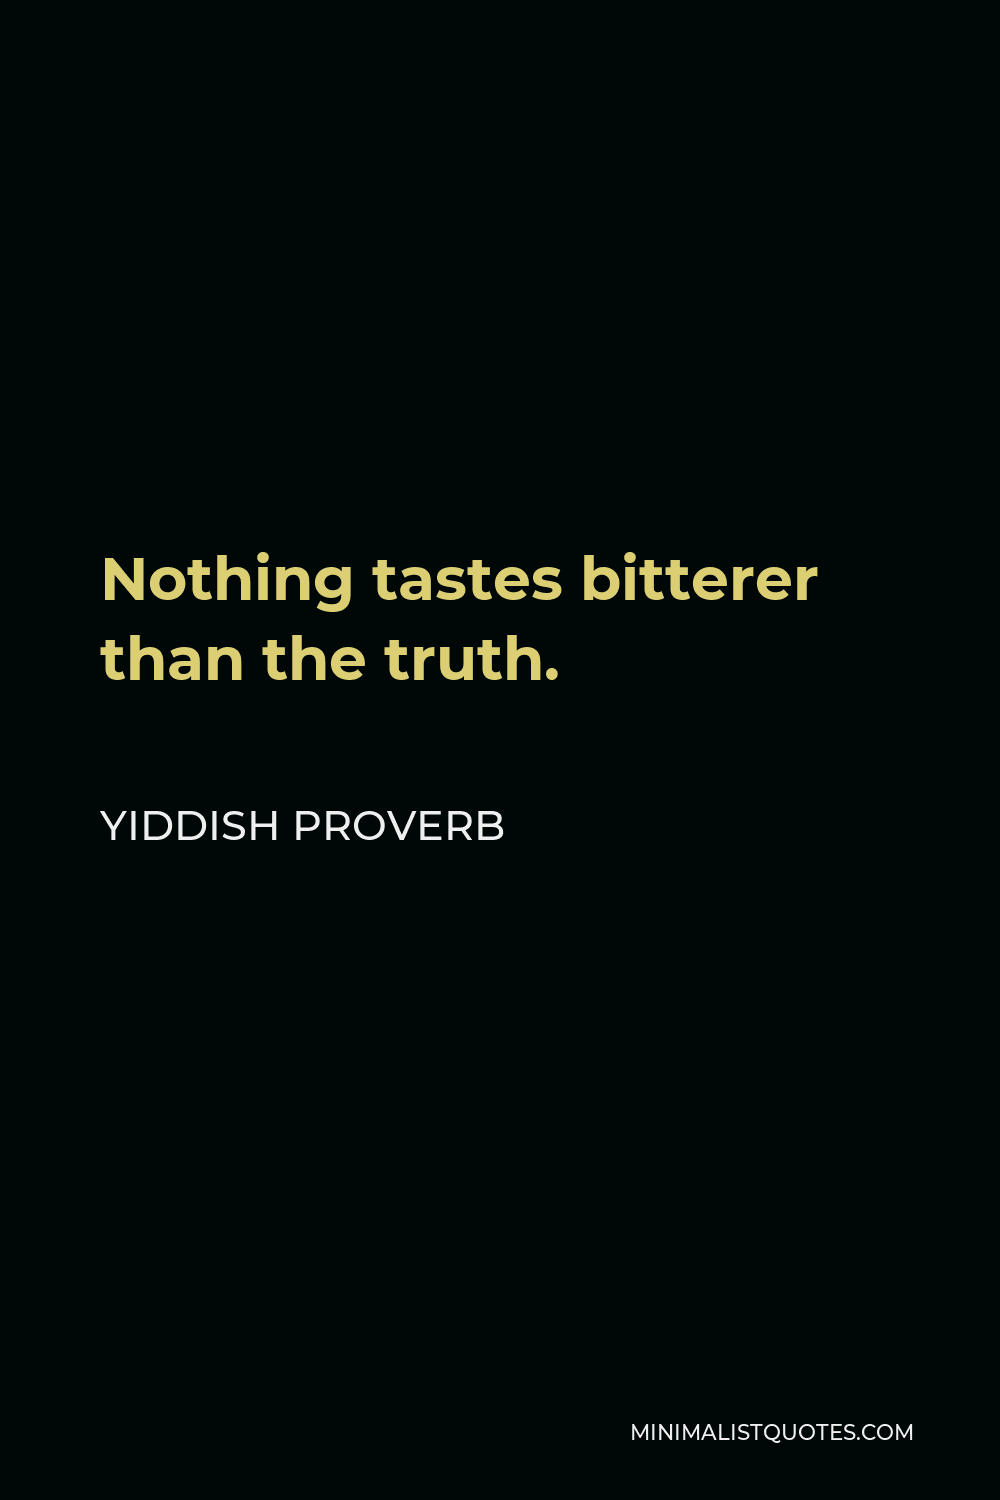 Yiddish Proverb Quote - Nothing tastes bitterer than the truth.